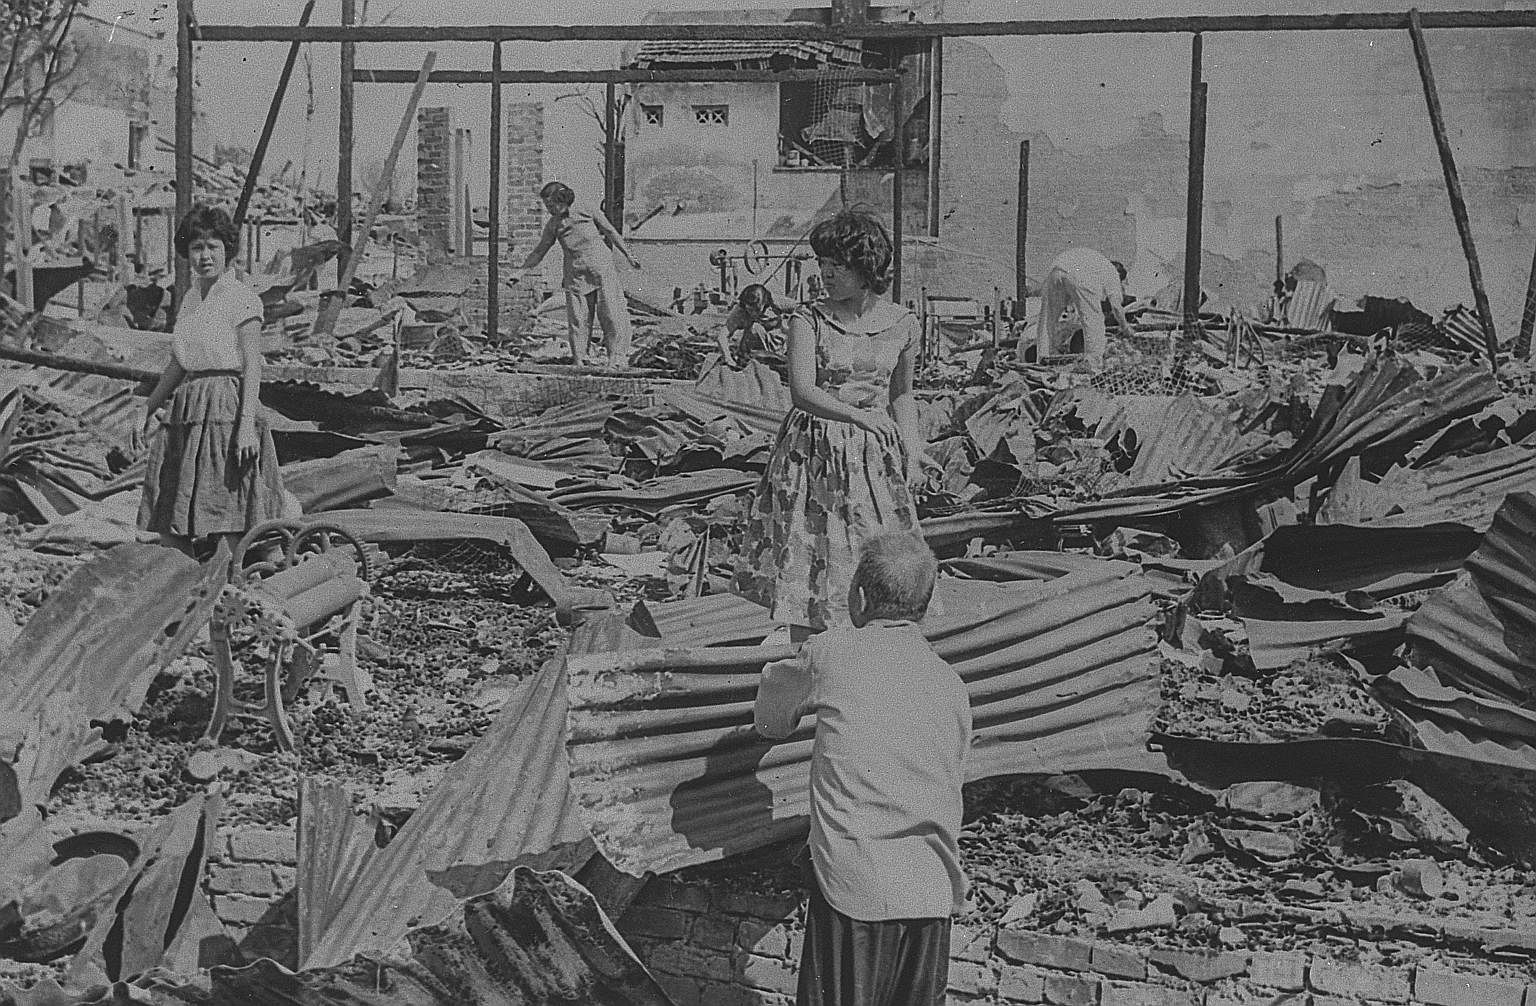 Former residents surveying the ruins of their homes in the aftermath of the fire. Within nine months of the blaze, all the victims were rehoused in flats. The opening in September 1961 of five HDB blocks with 904 one-room, semi-communal units, all of